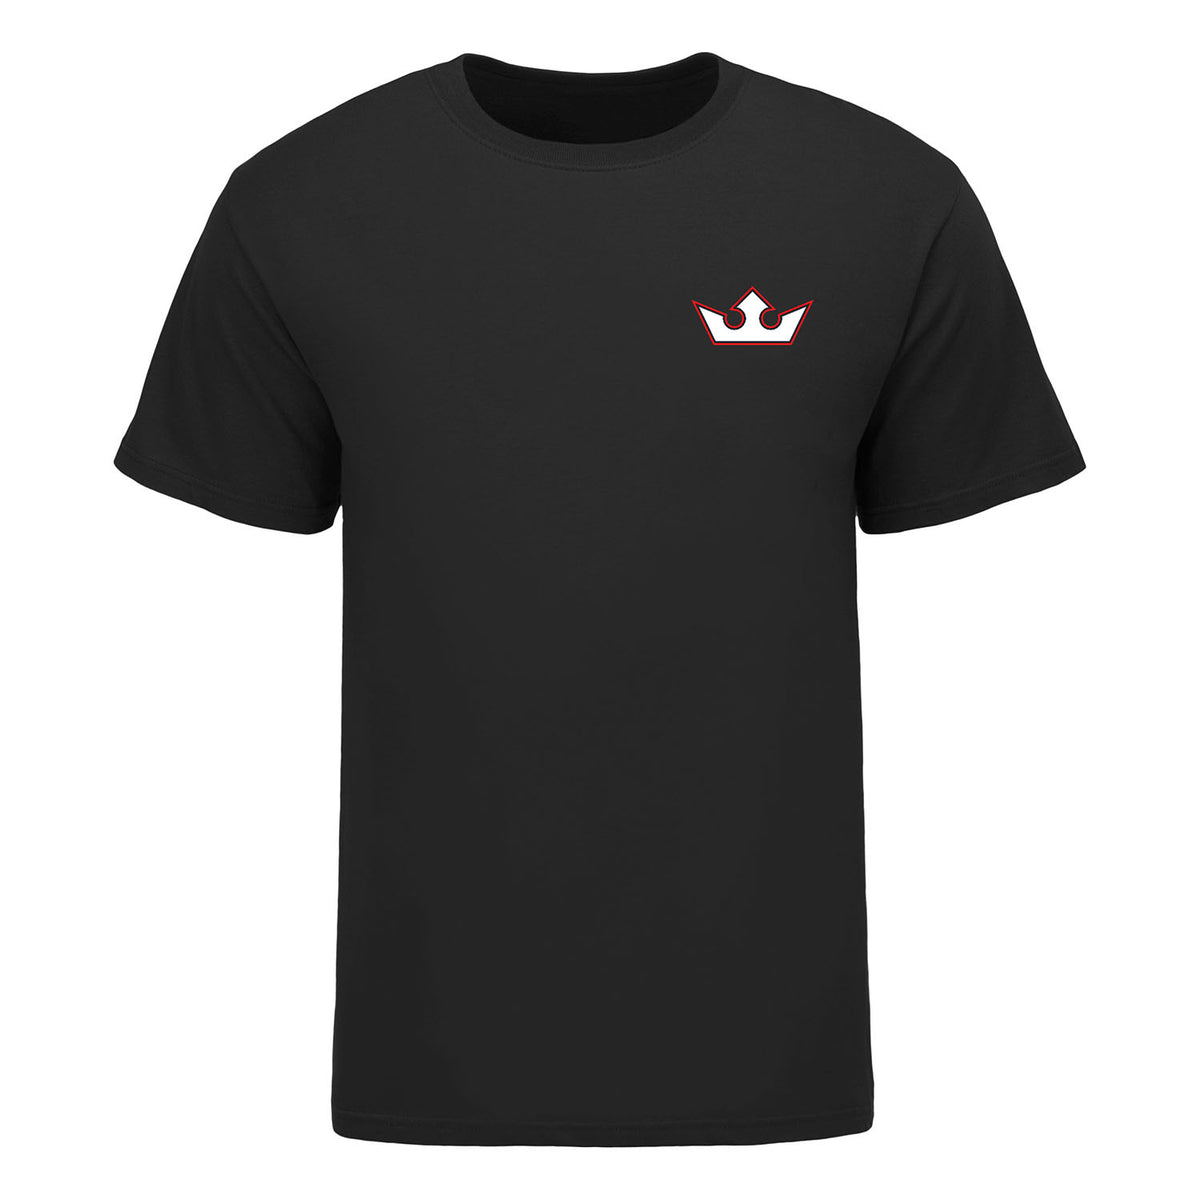 PFL Big Back Arch T-Shirt in Black - Front View